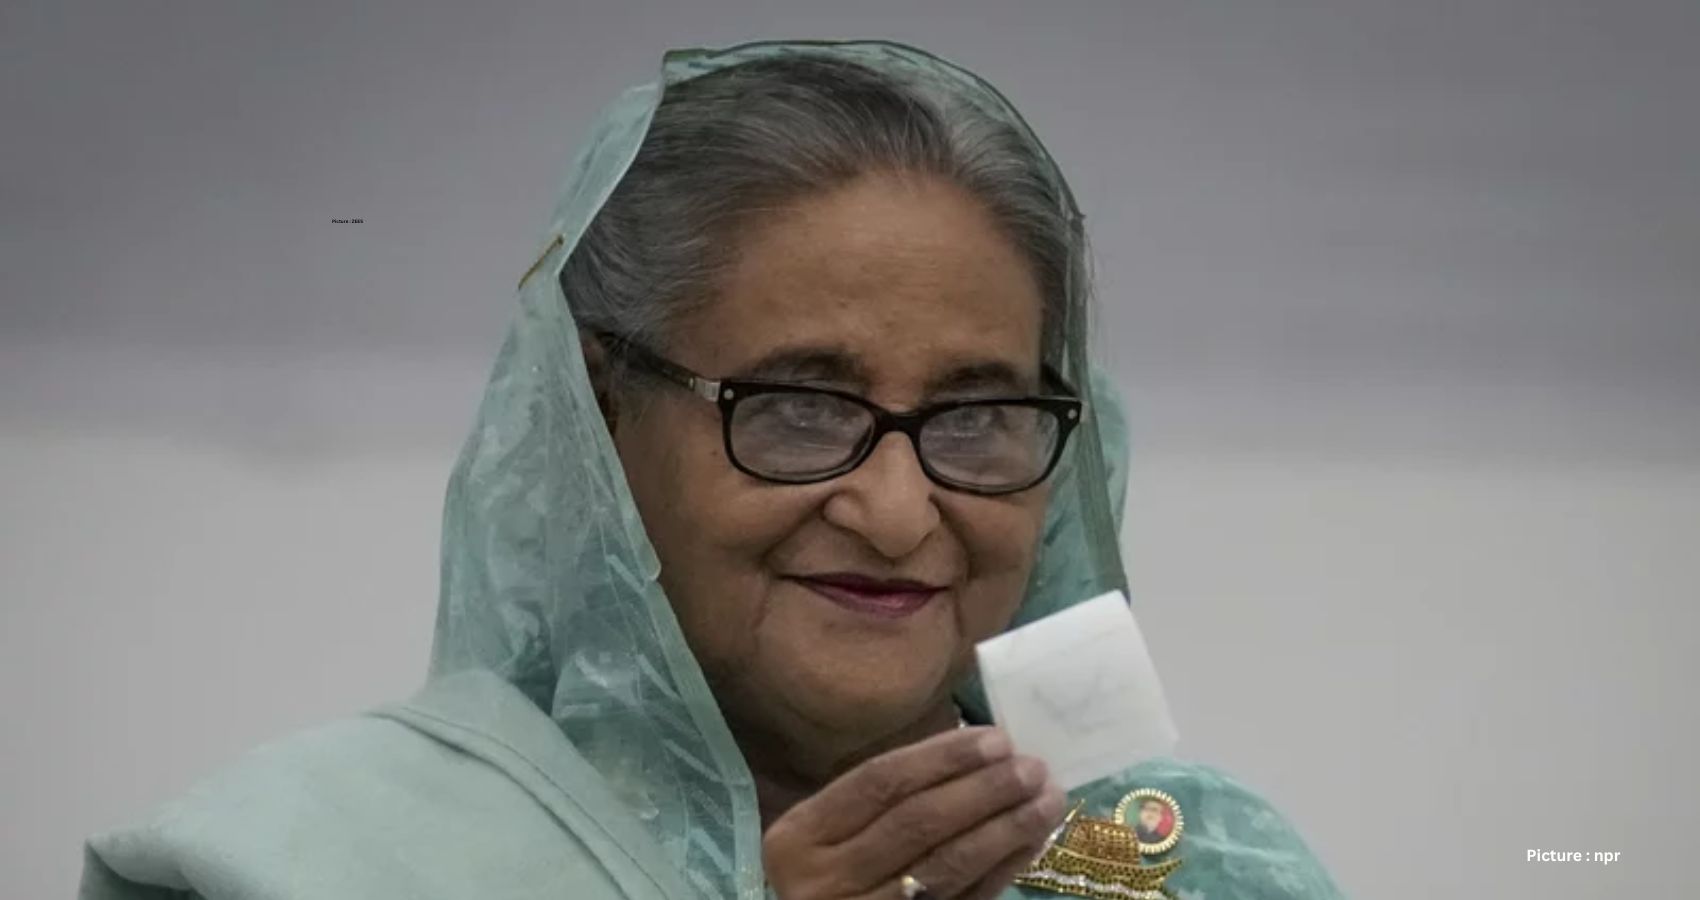 Featured & Cover Prime Minister Sheikh Hasina Secures Fourth Consecutive Term Amid Controversy in Bangladesh Election